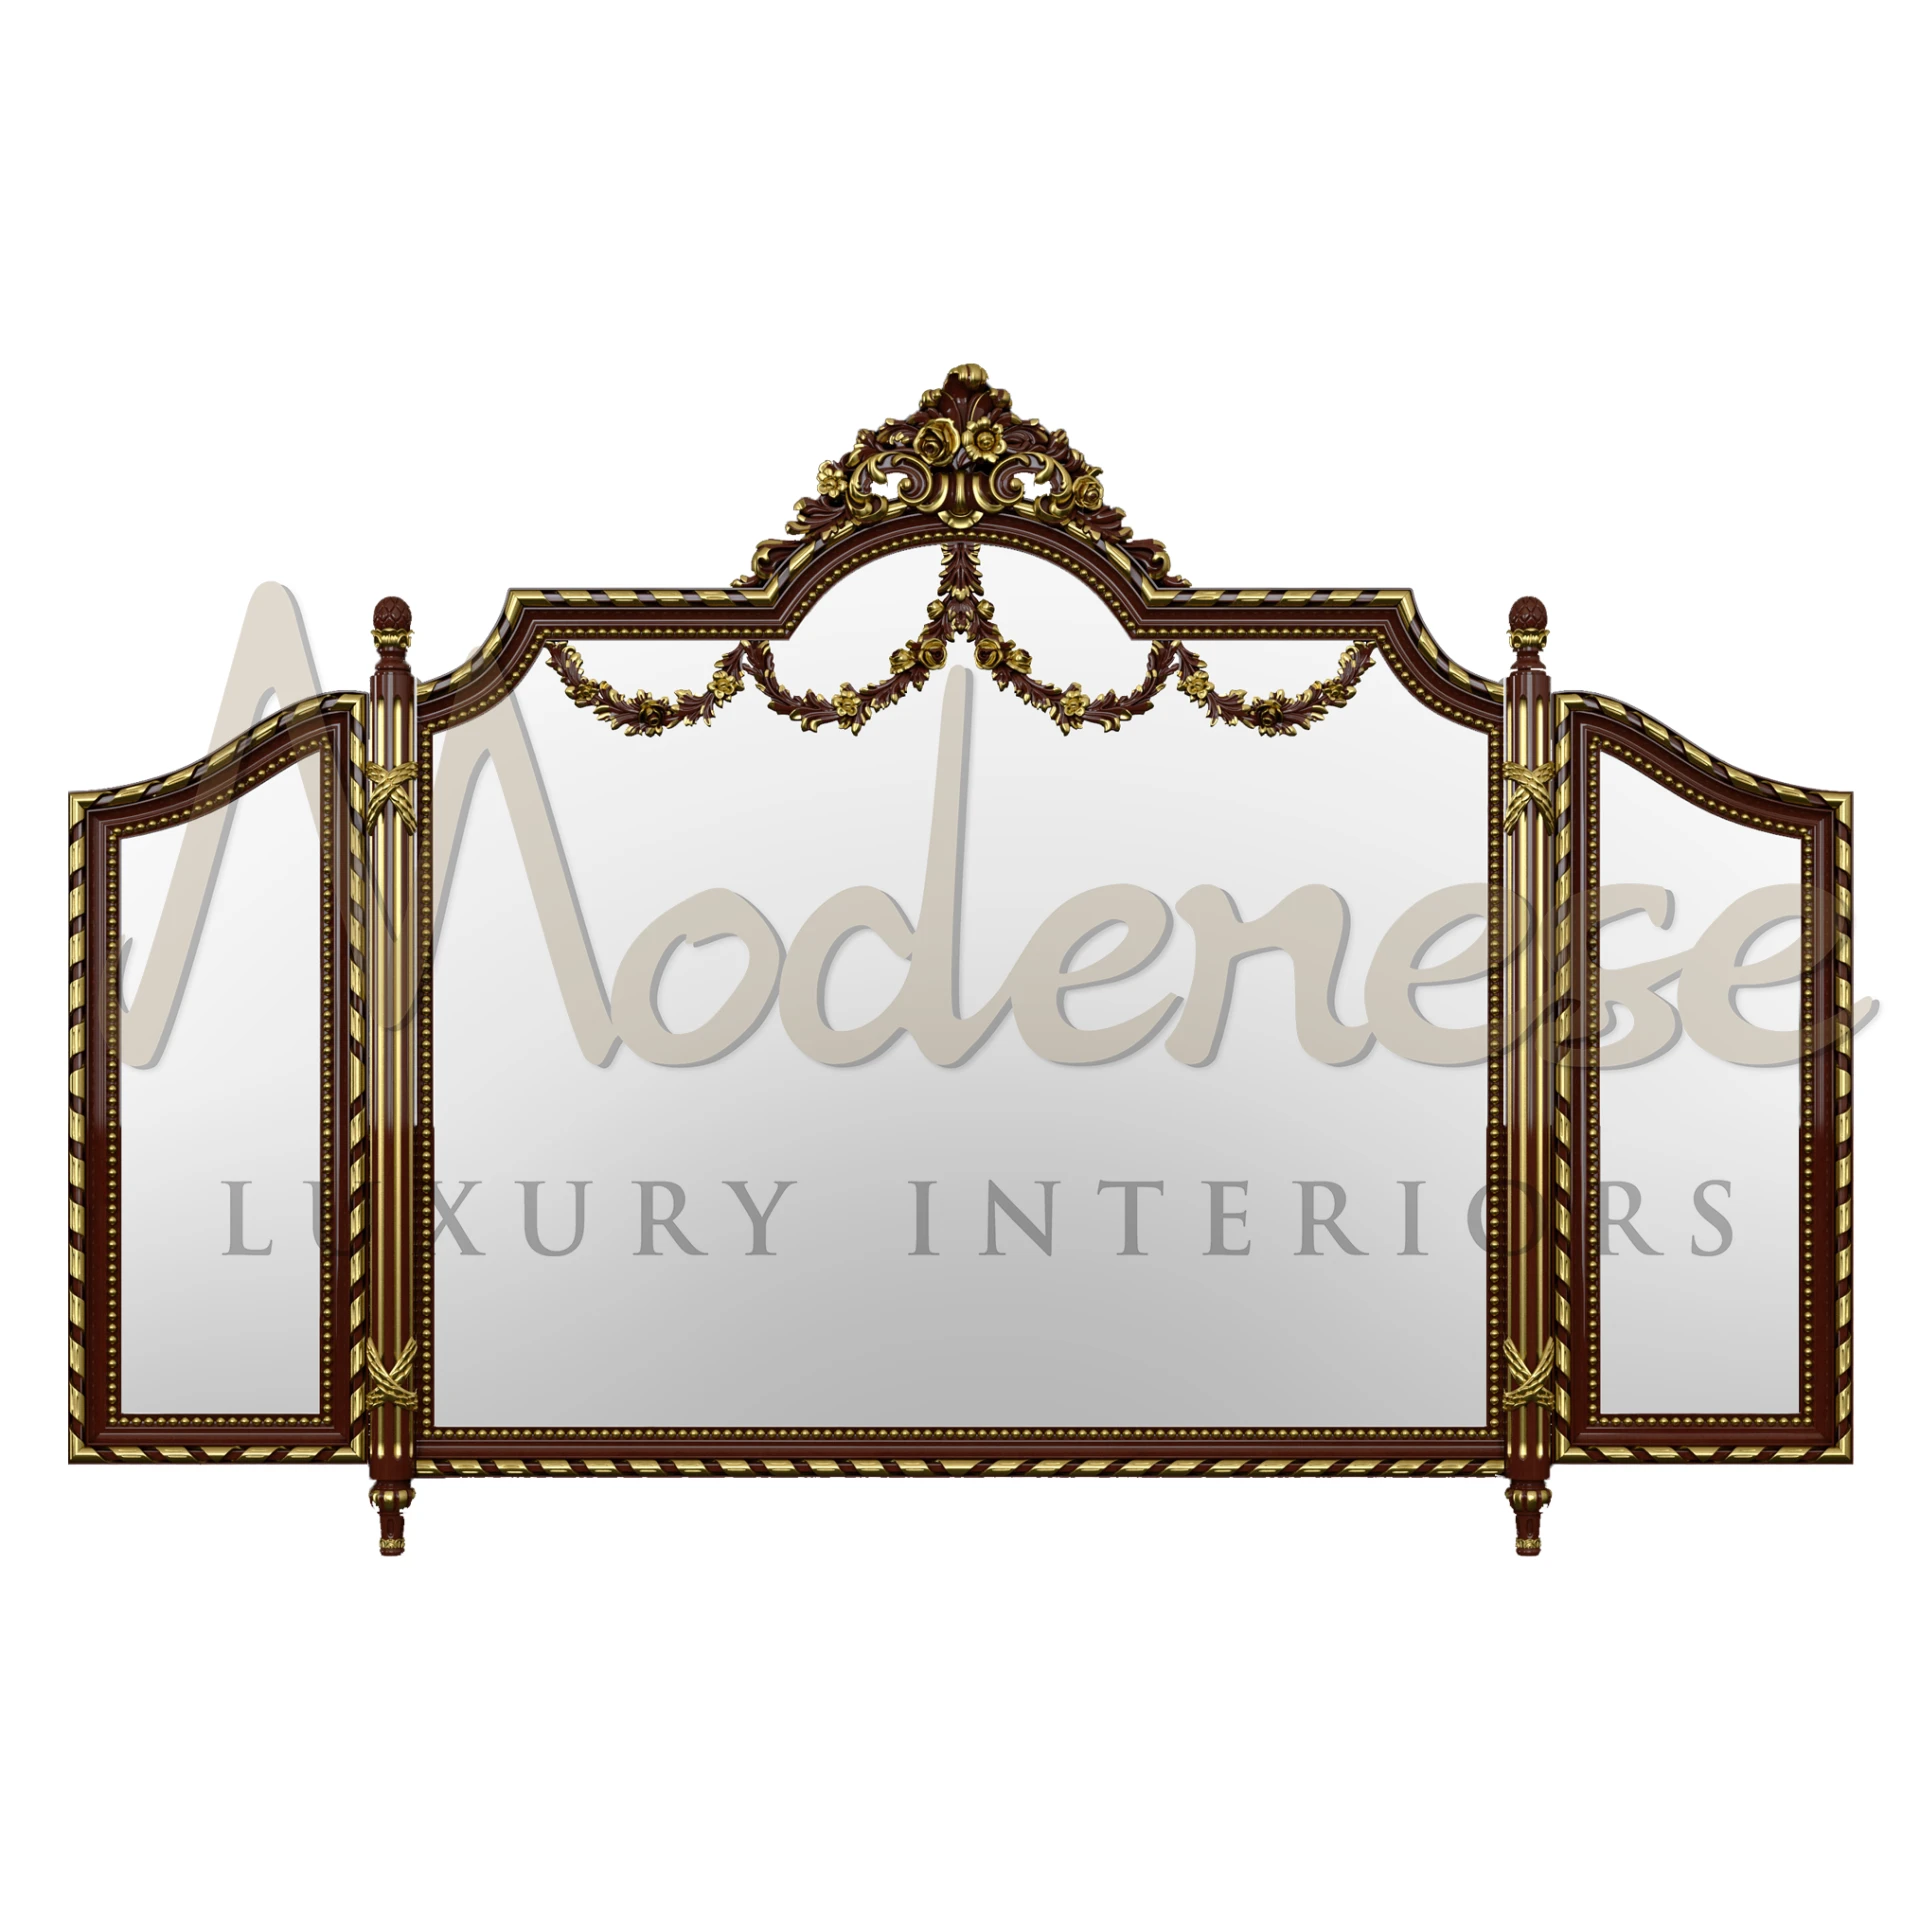 Noble Handmade Figured Mirror features magnificent carvings, embodying classic and baroque styles for a luxurious interior design.